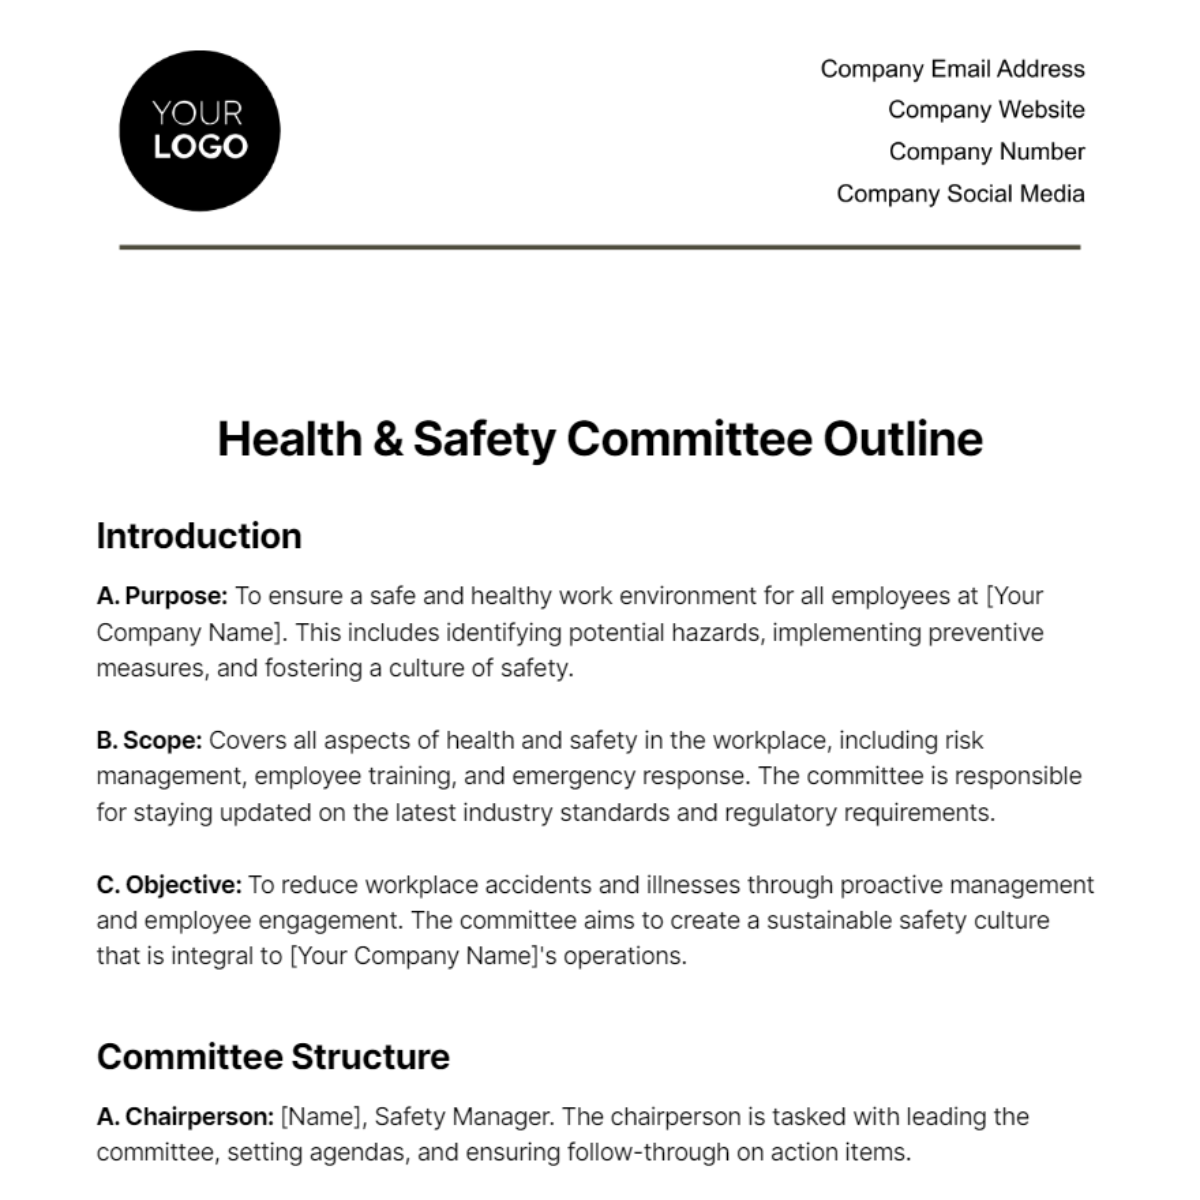 Health & Safety Committee Outline Template